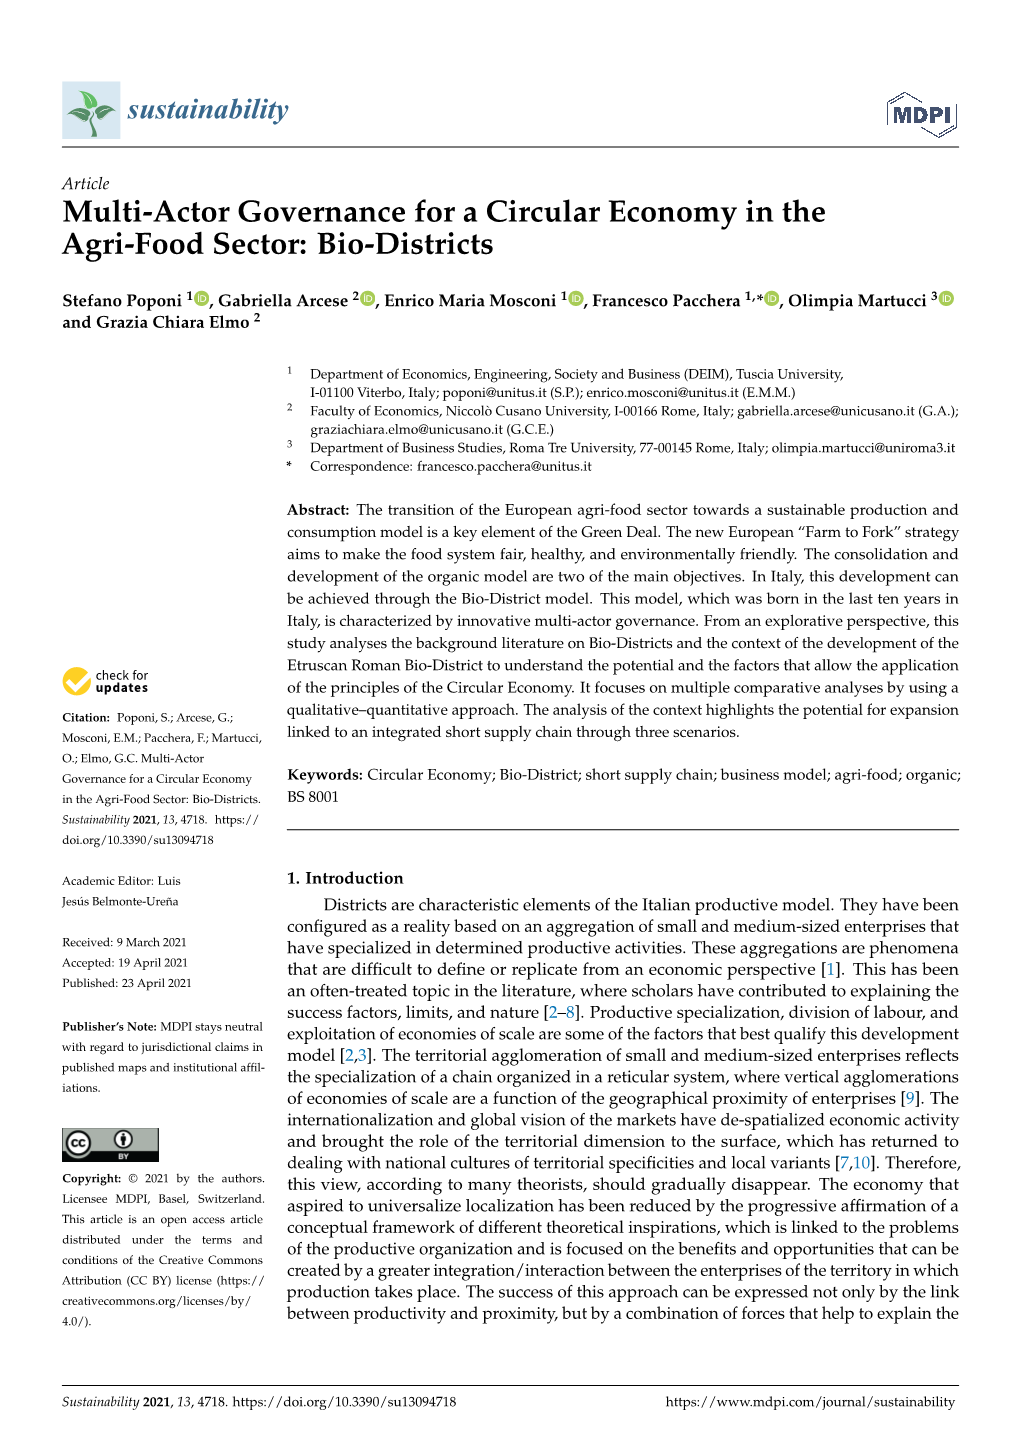 Multi-Actor Governance for a Circular Economy in the Agri-Food Sector: Bio-Districts